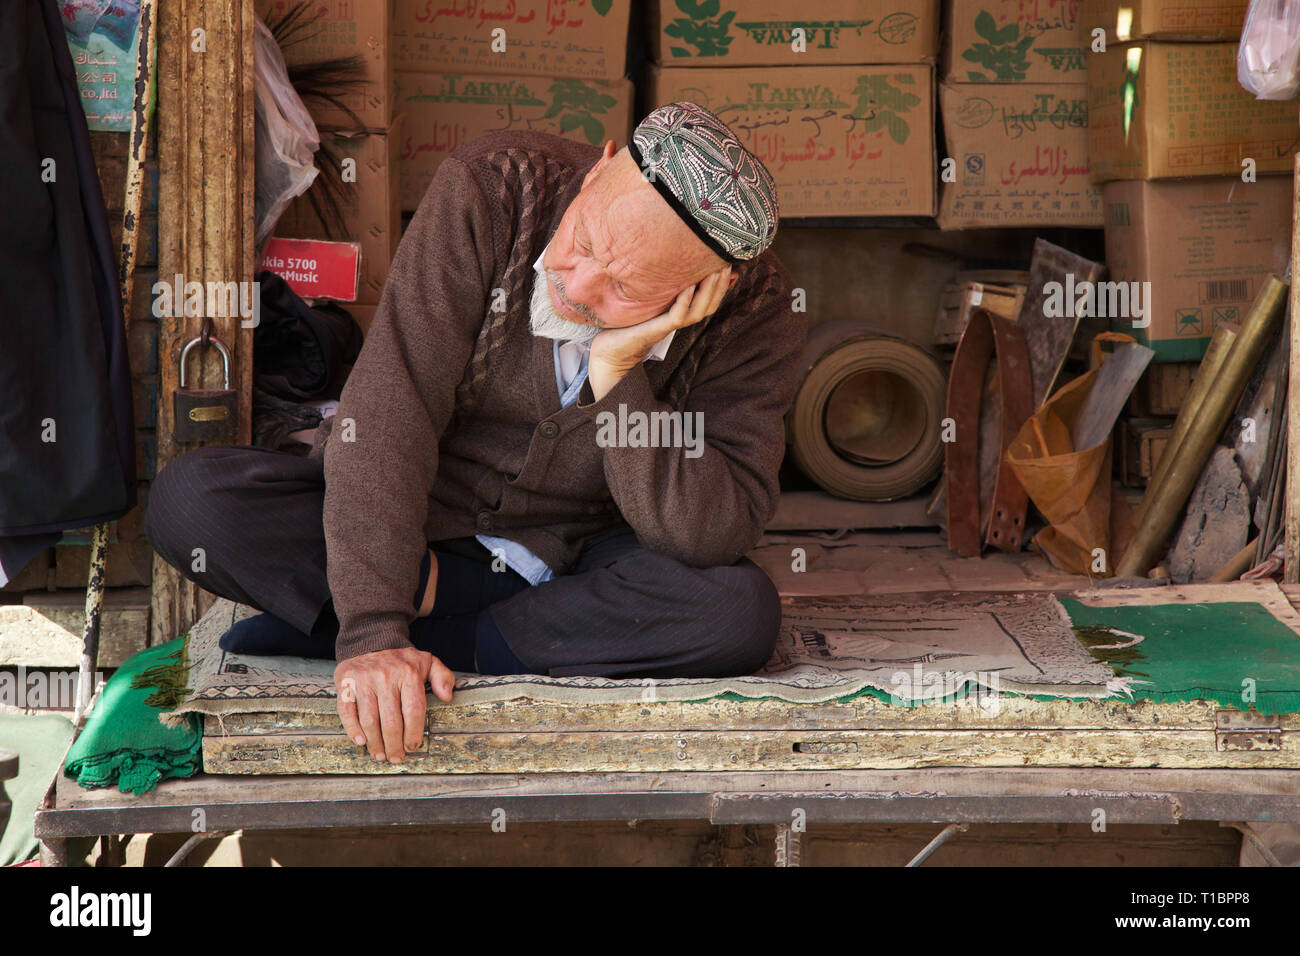 Old uighur shopkeeper fell asleep in front of his store, Kashgar Old Town, Xinjiang Autonomous Region, China. Stock Photo